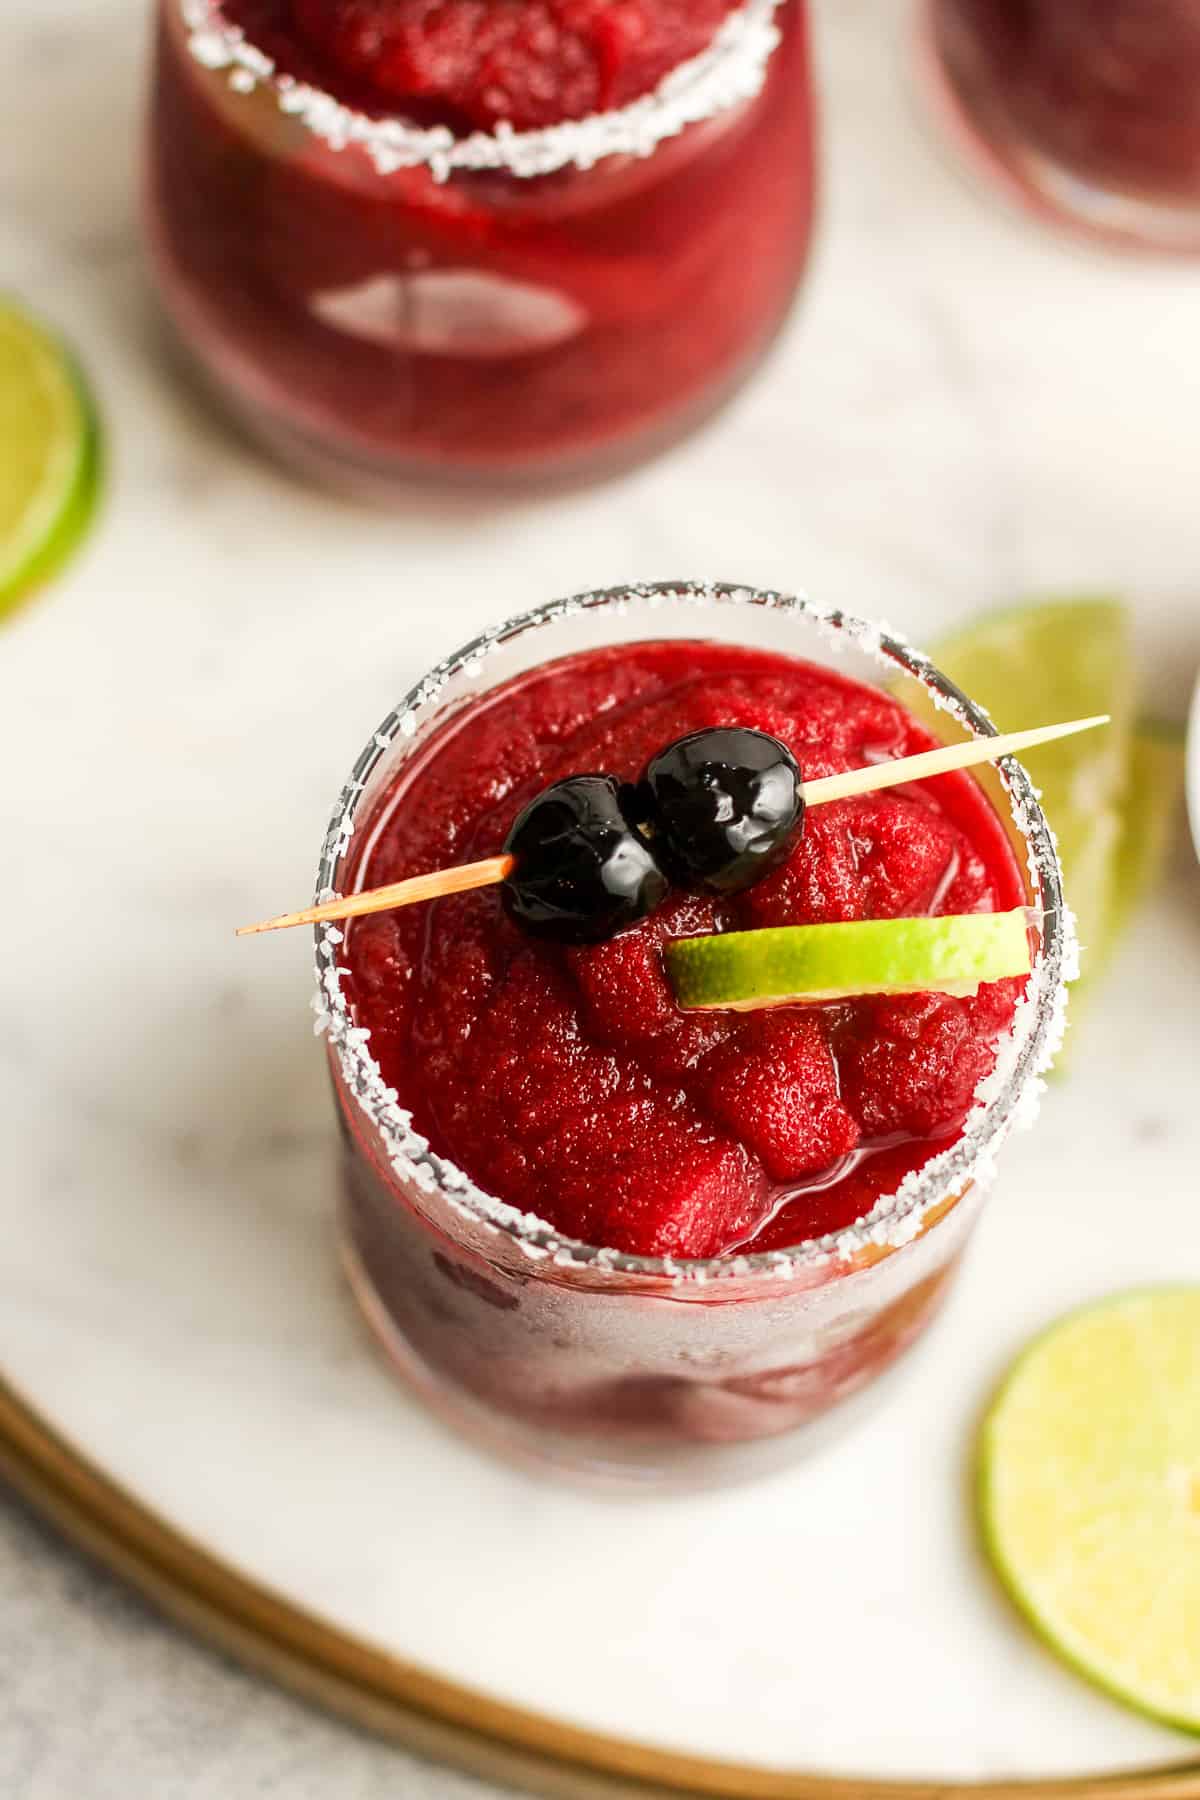 Overhead view of a cherry margarita with a cherry garnish.